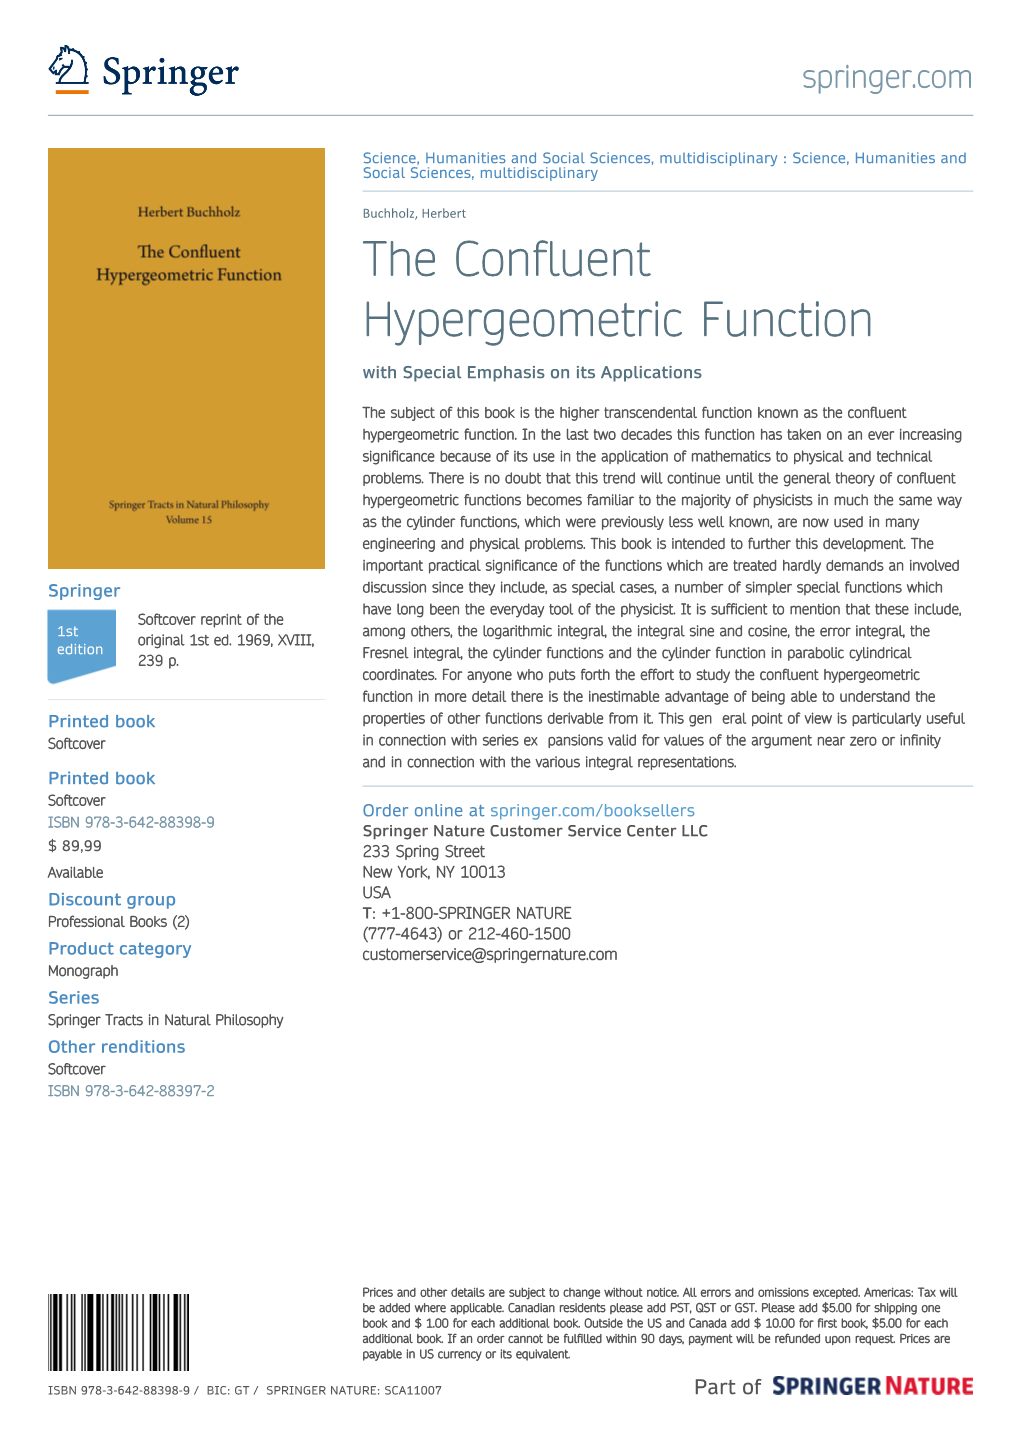 The Confluent Hypergeometric Function with Special Emphasis on Its Applications